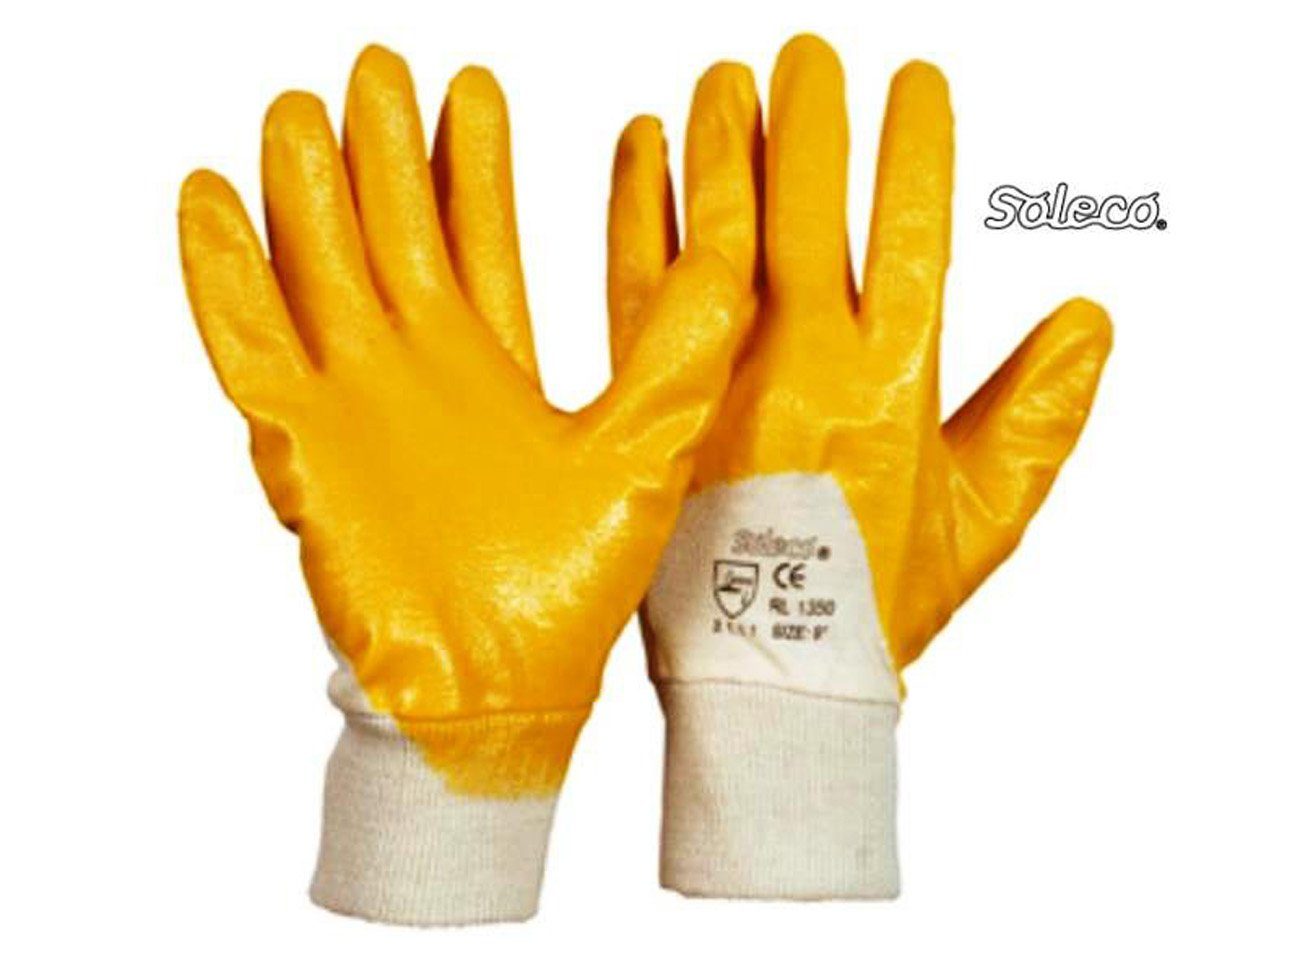 Soleco… Arbeitshandschuhe 12 LEIPOLD Leipold Nitril Döhle Montage-Handschuhe Paar +